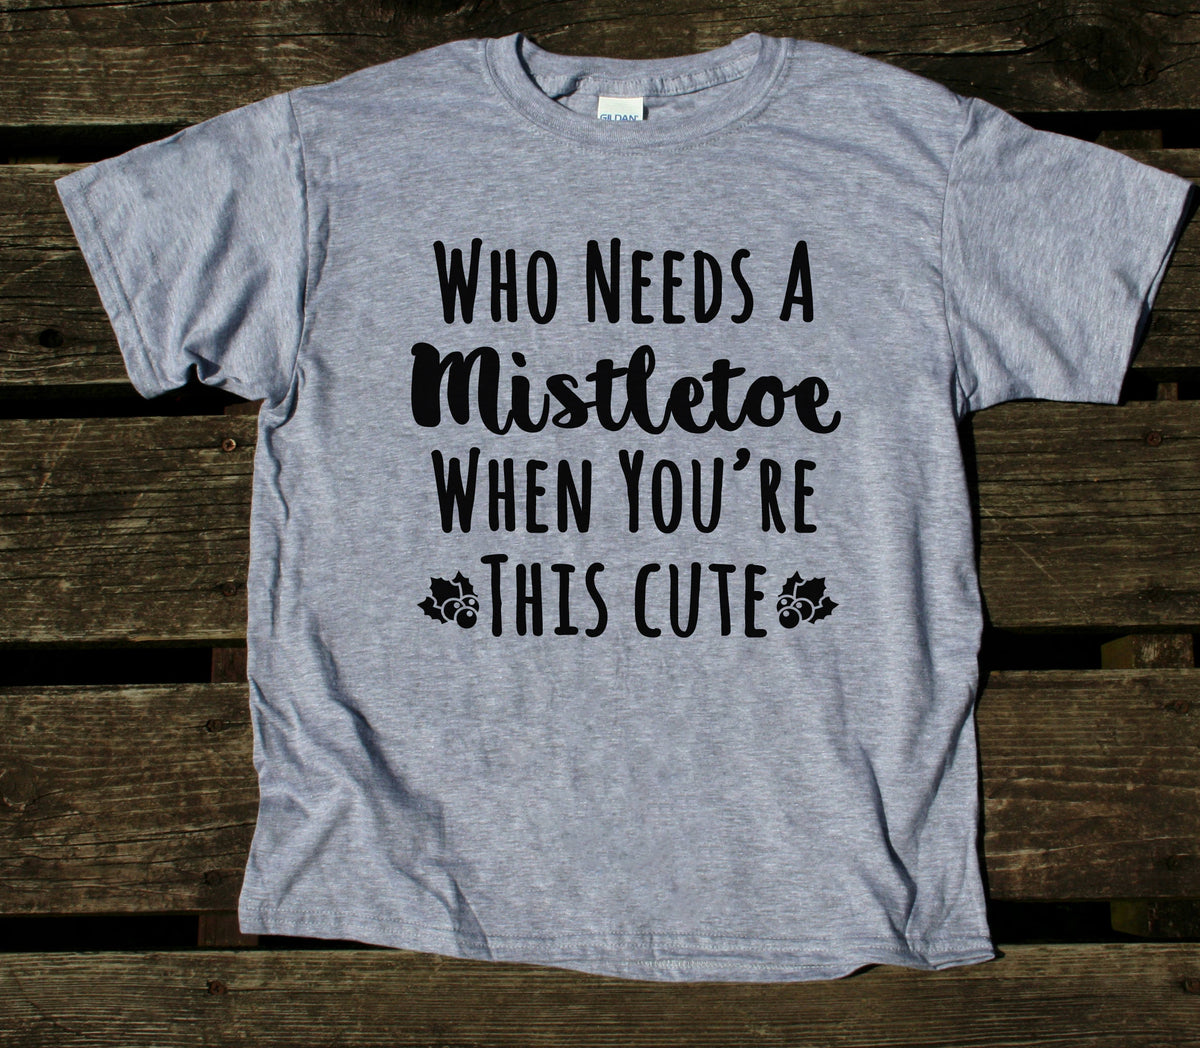 Cute Christmas Youth Shirt Who Needs A Mistletoe When You're This Cute ...